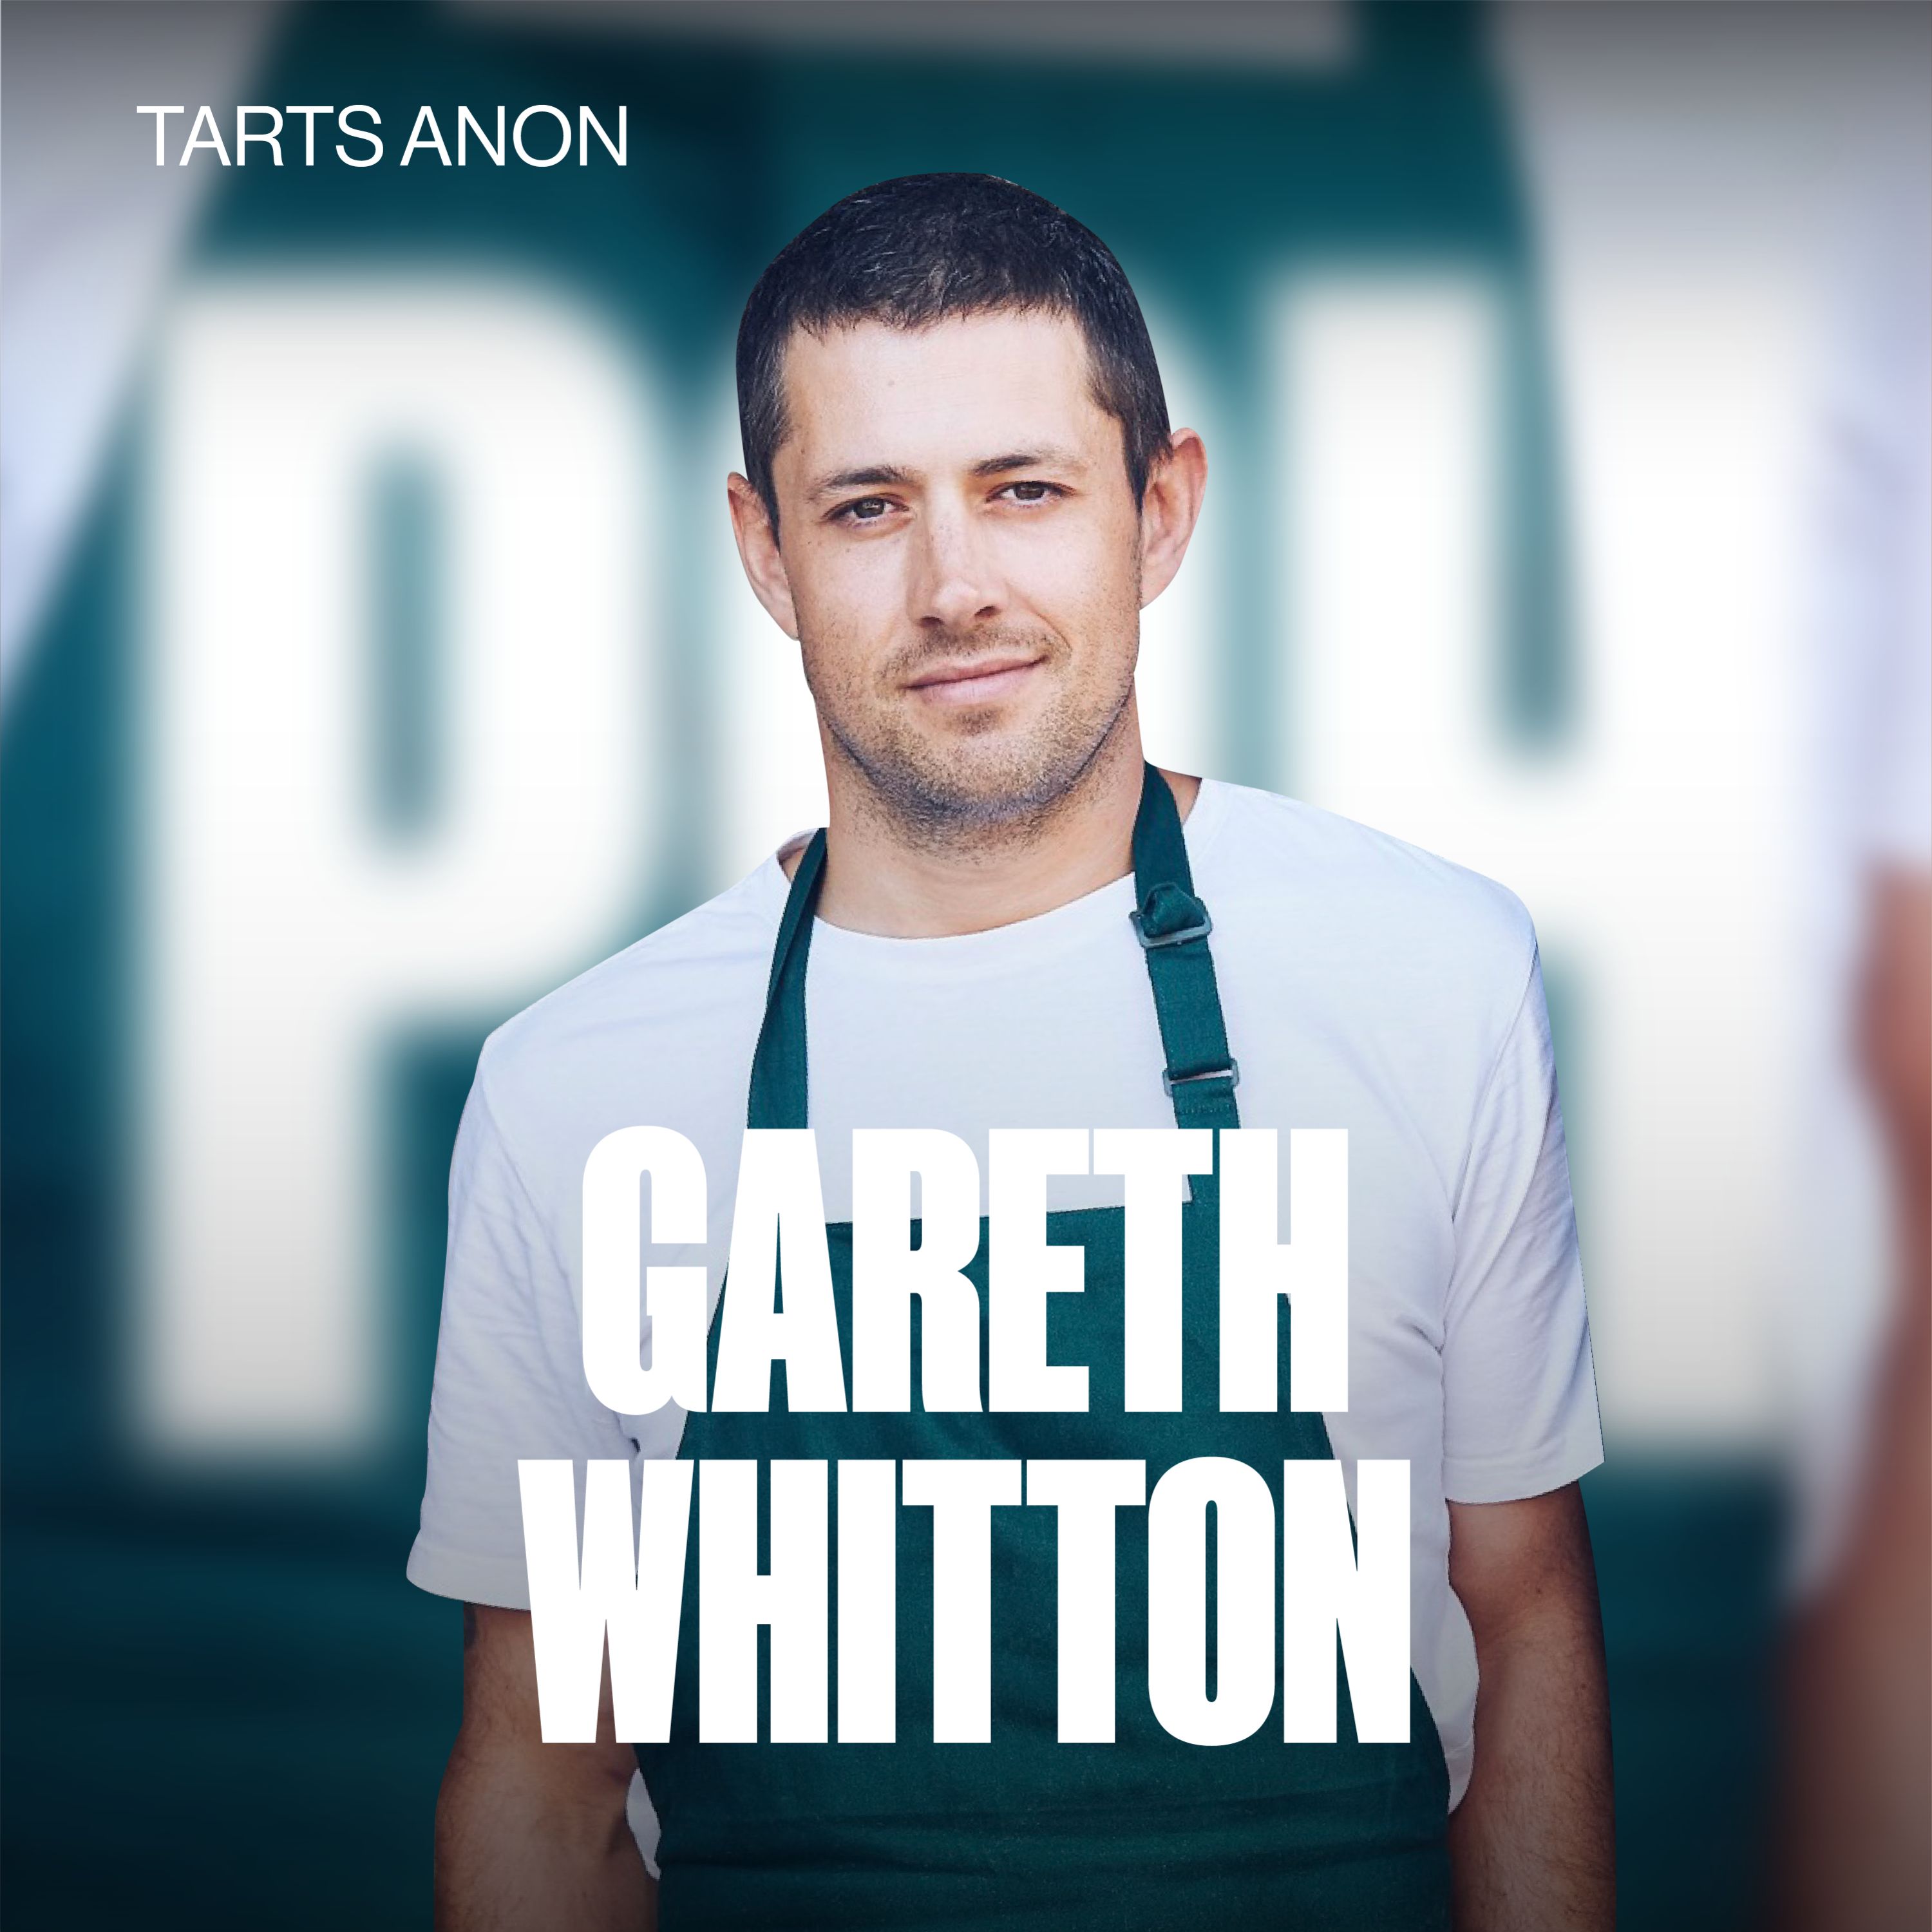 Ep 276 - From Pandemic to Pastry Powerhouse: The Tarts Anon Tale With Gareth Whitton from Tarts Anon